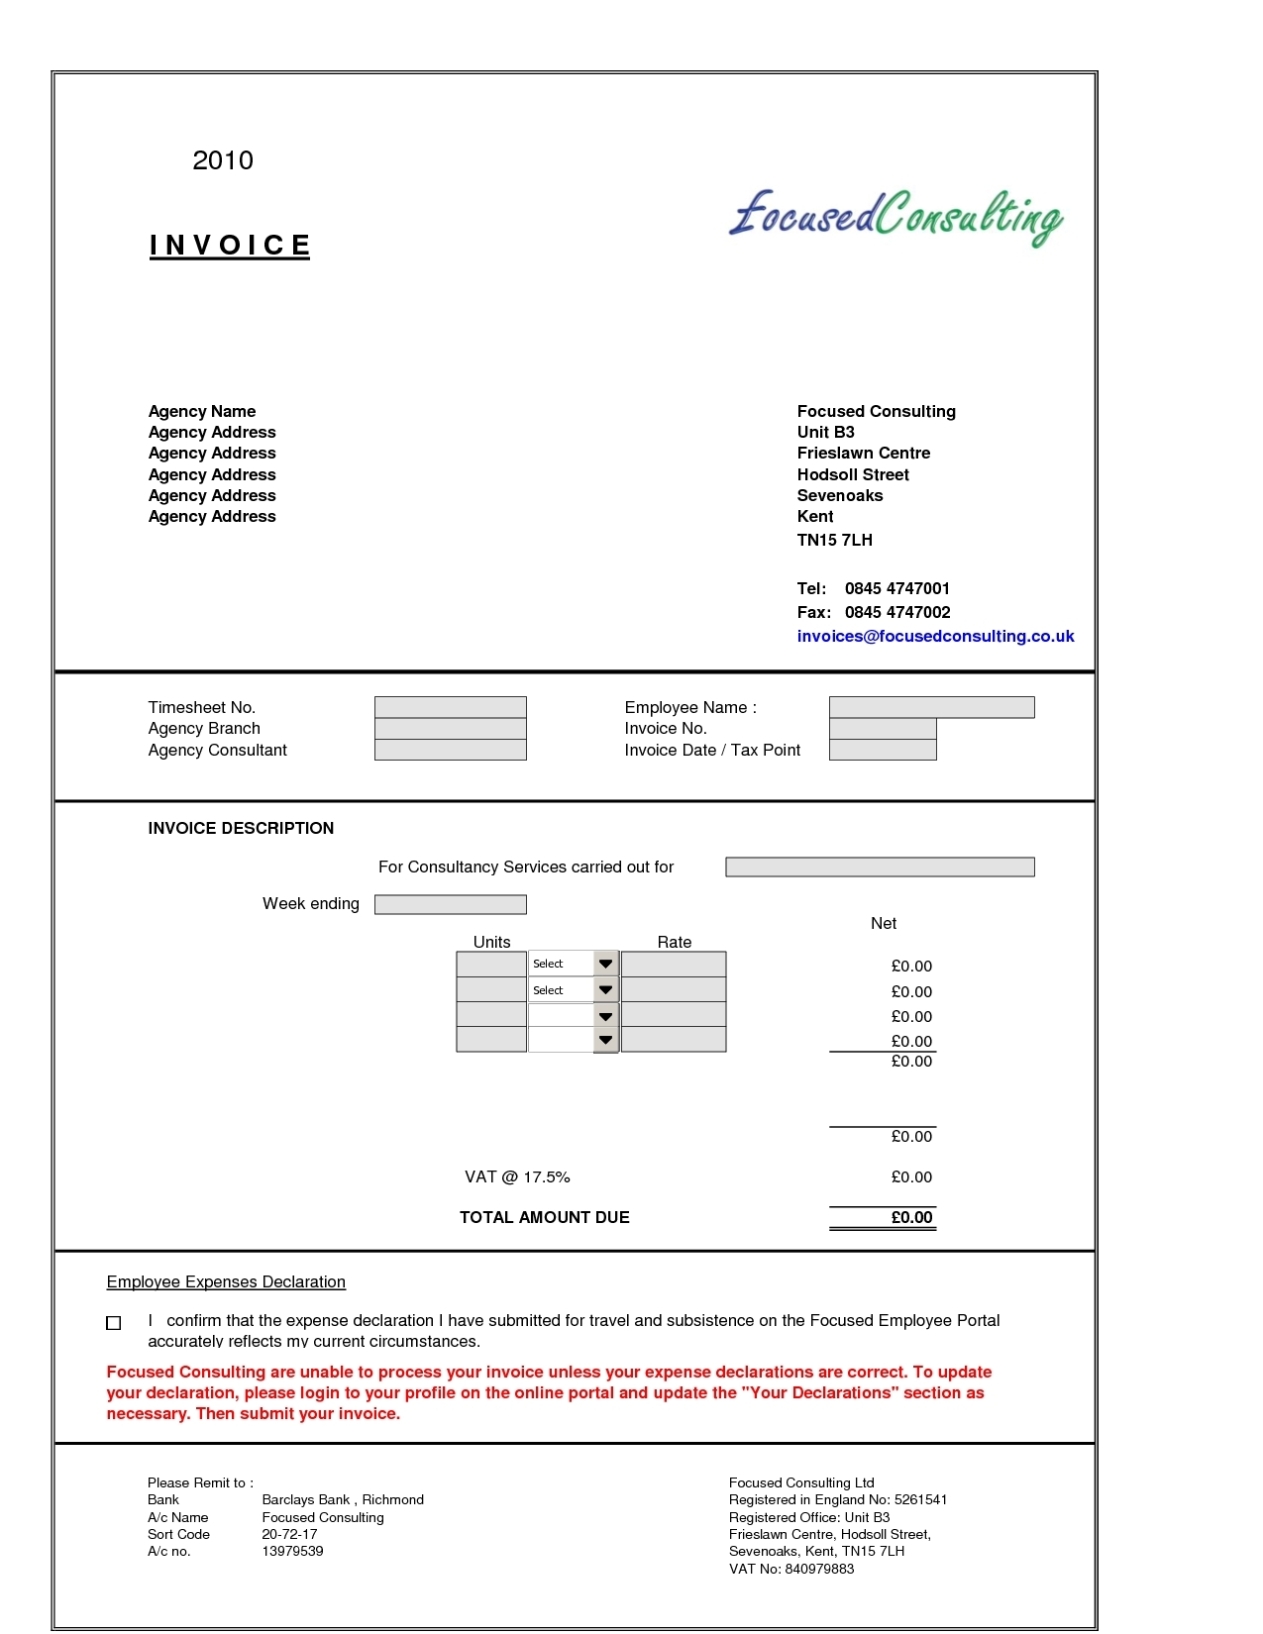 Sample Invoices For Consulting Services * Invoice Template Ideas With Regard To Software Consulting Invoice Template